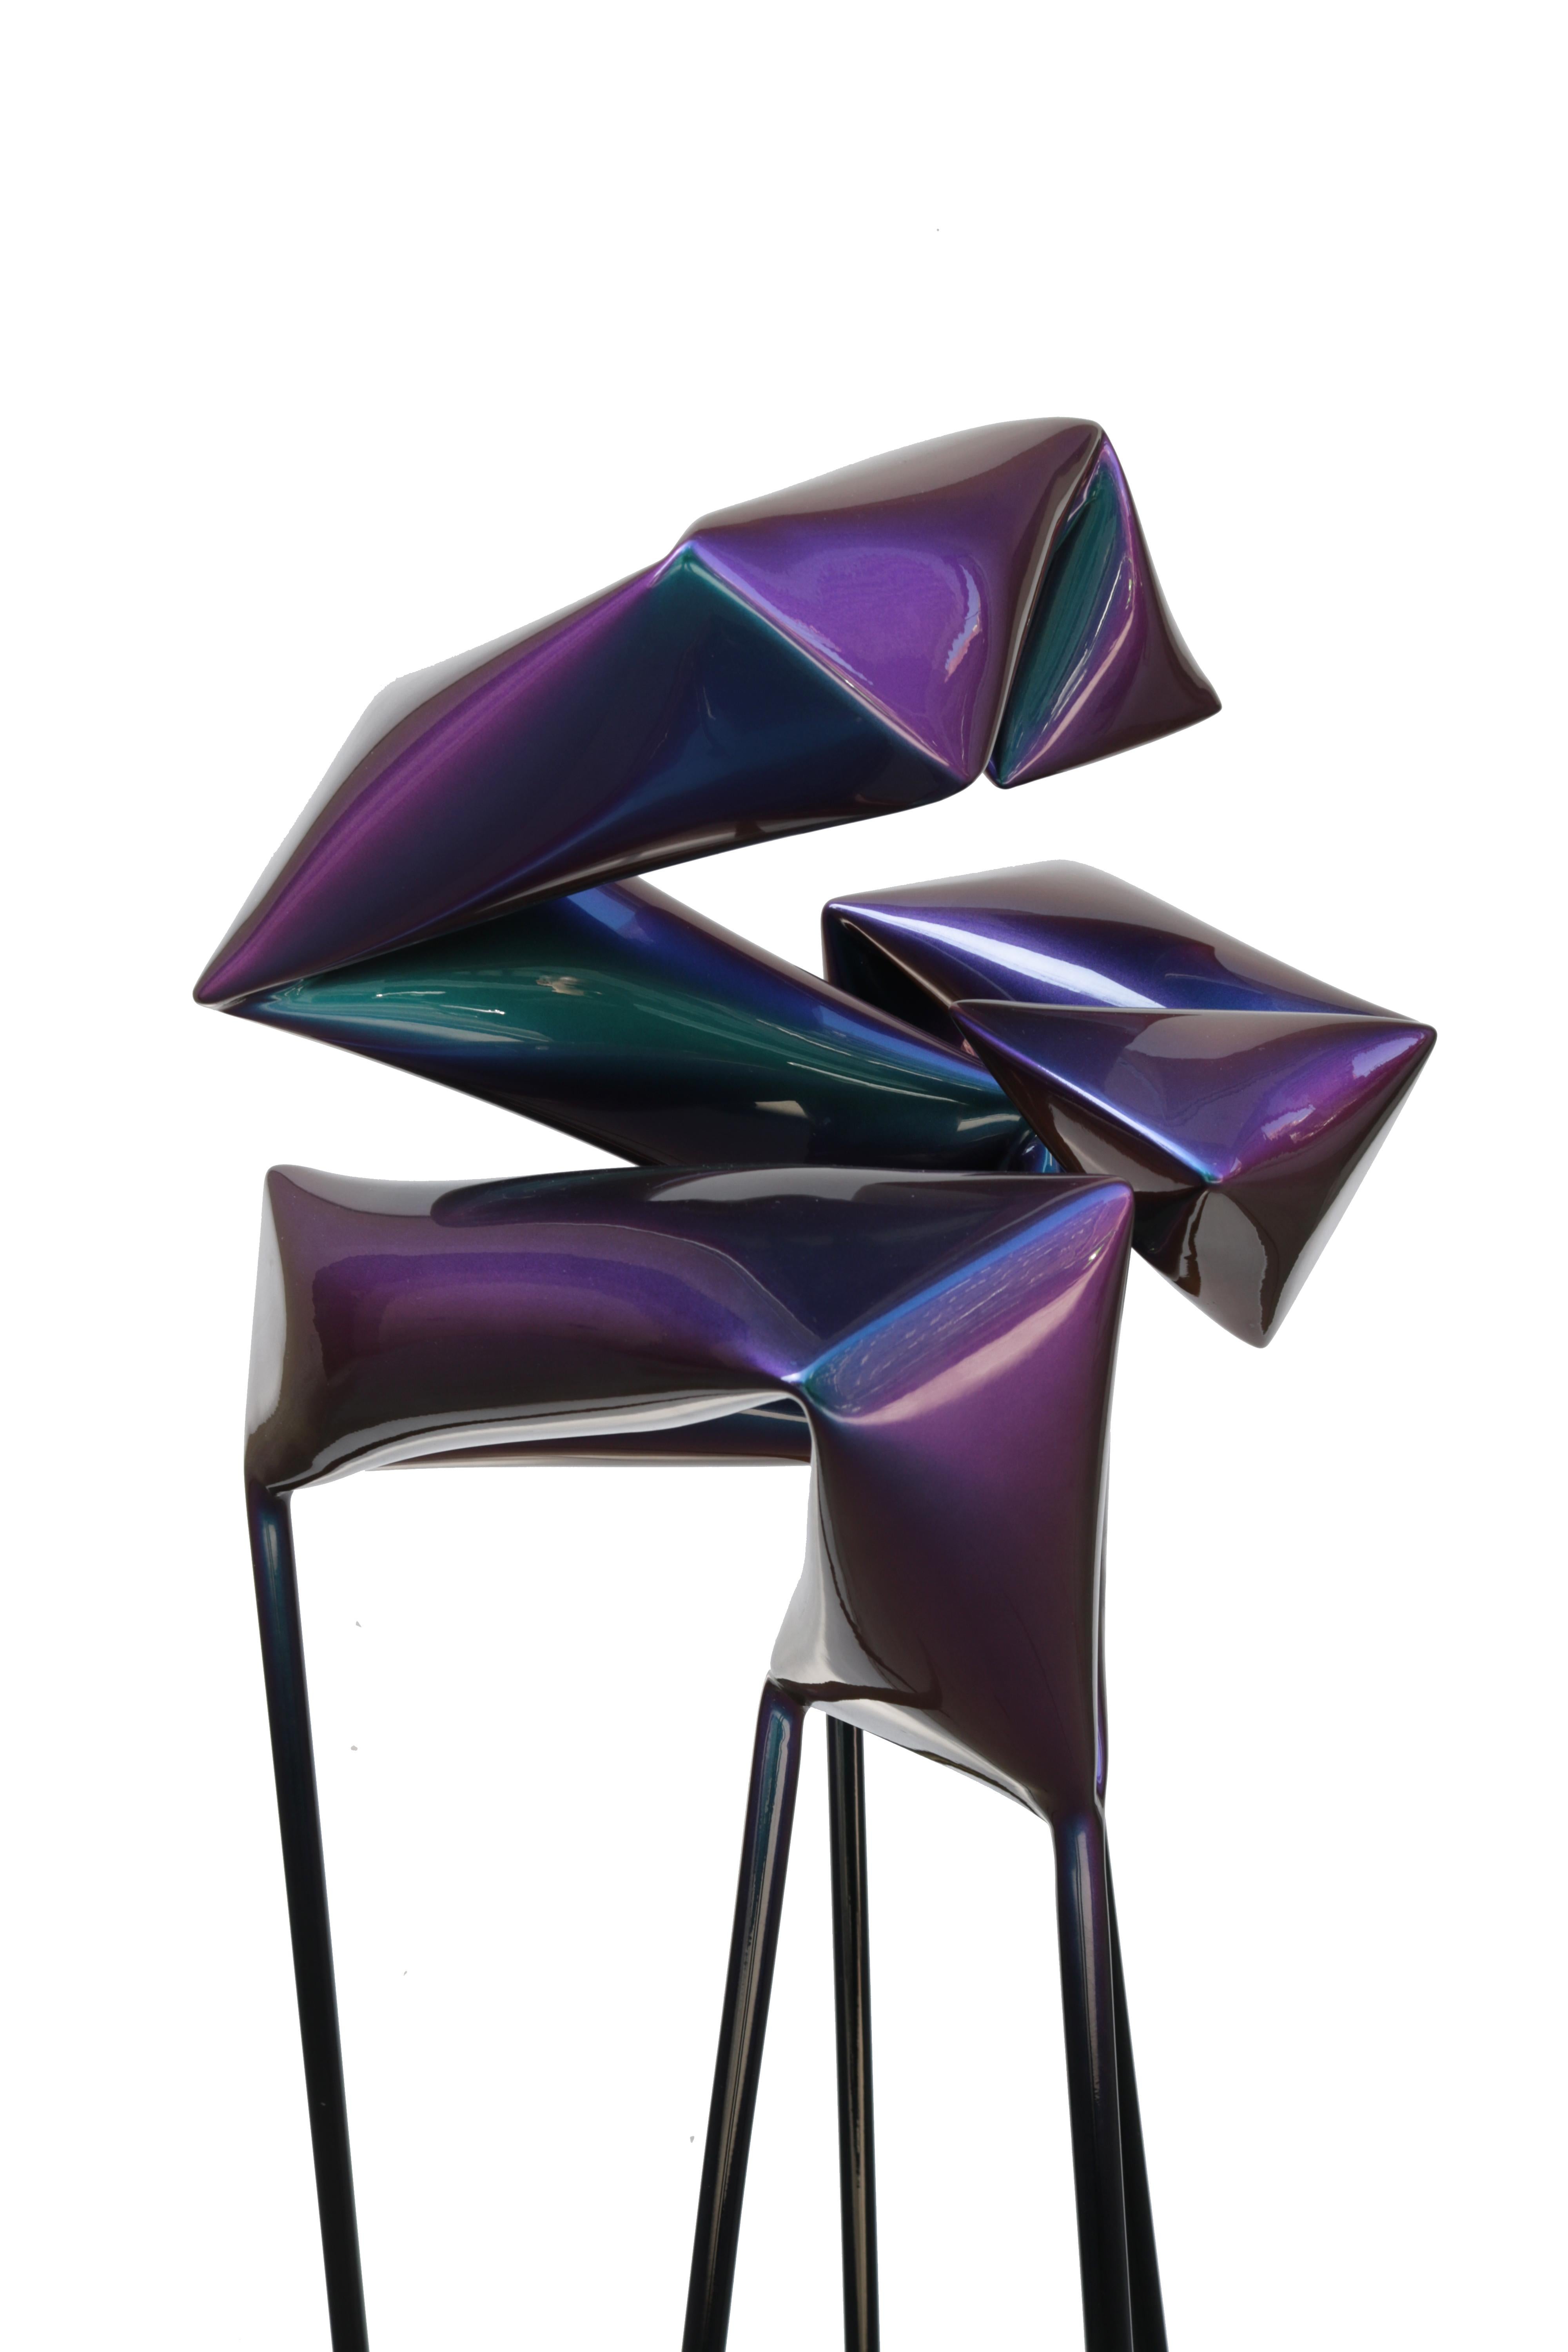 Freestanding contemporary floor sculpture by artist Willi Siber. 
Interference lacquer on metal.